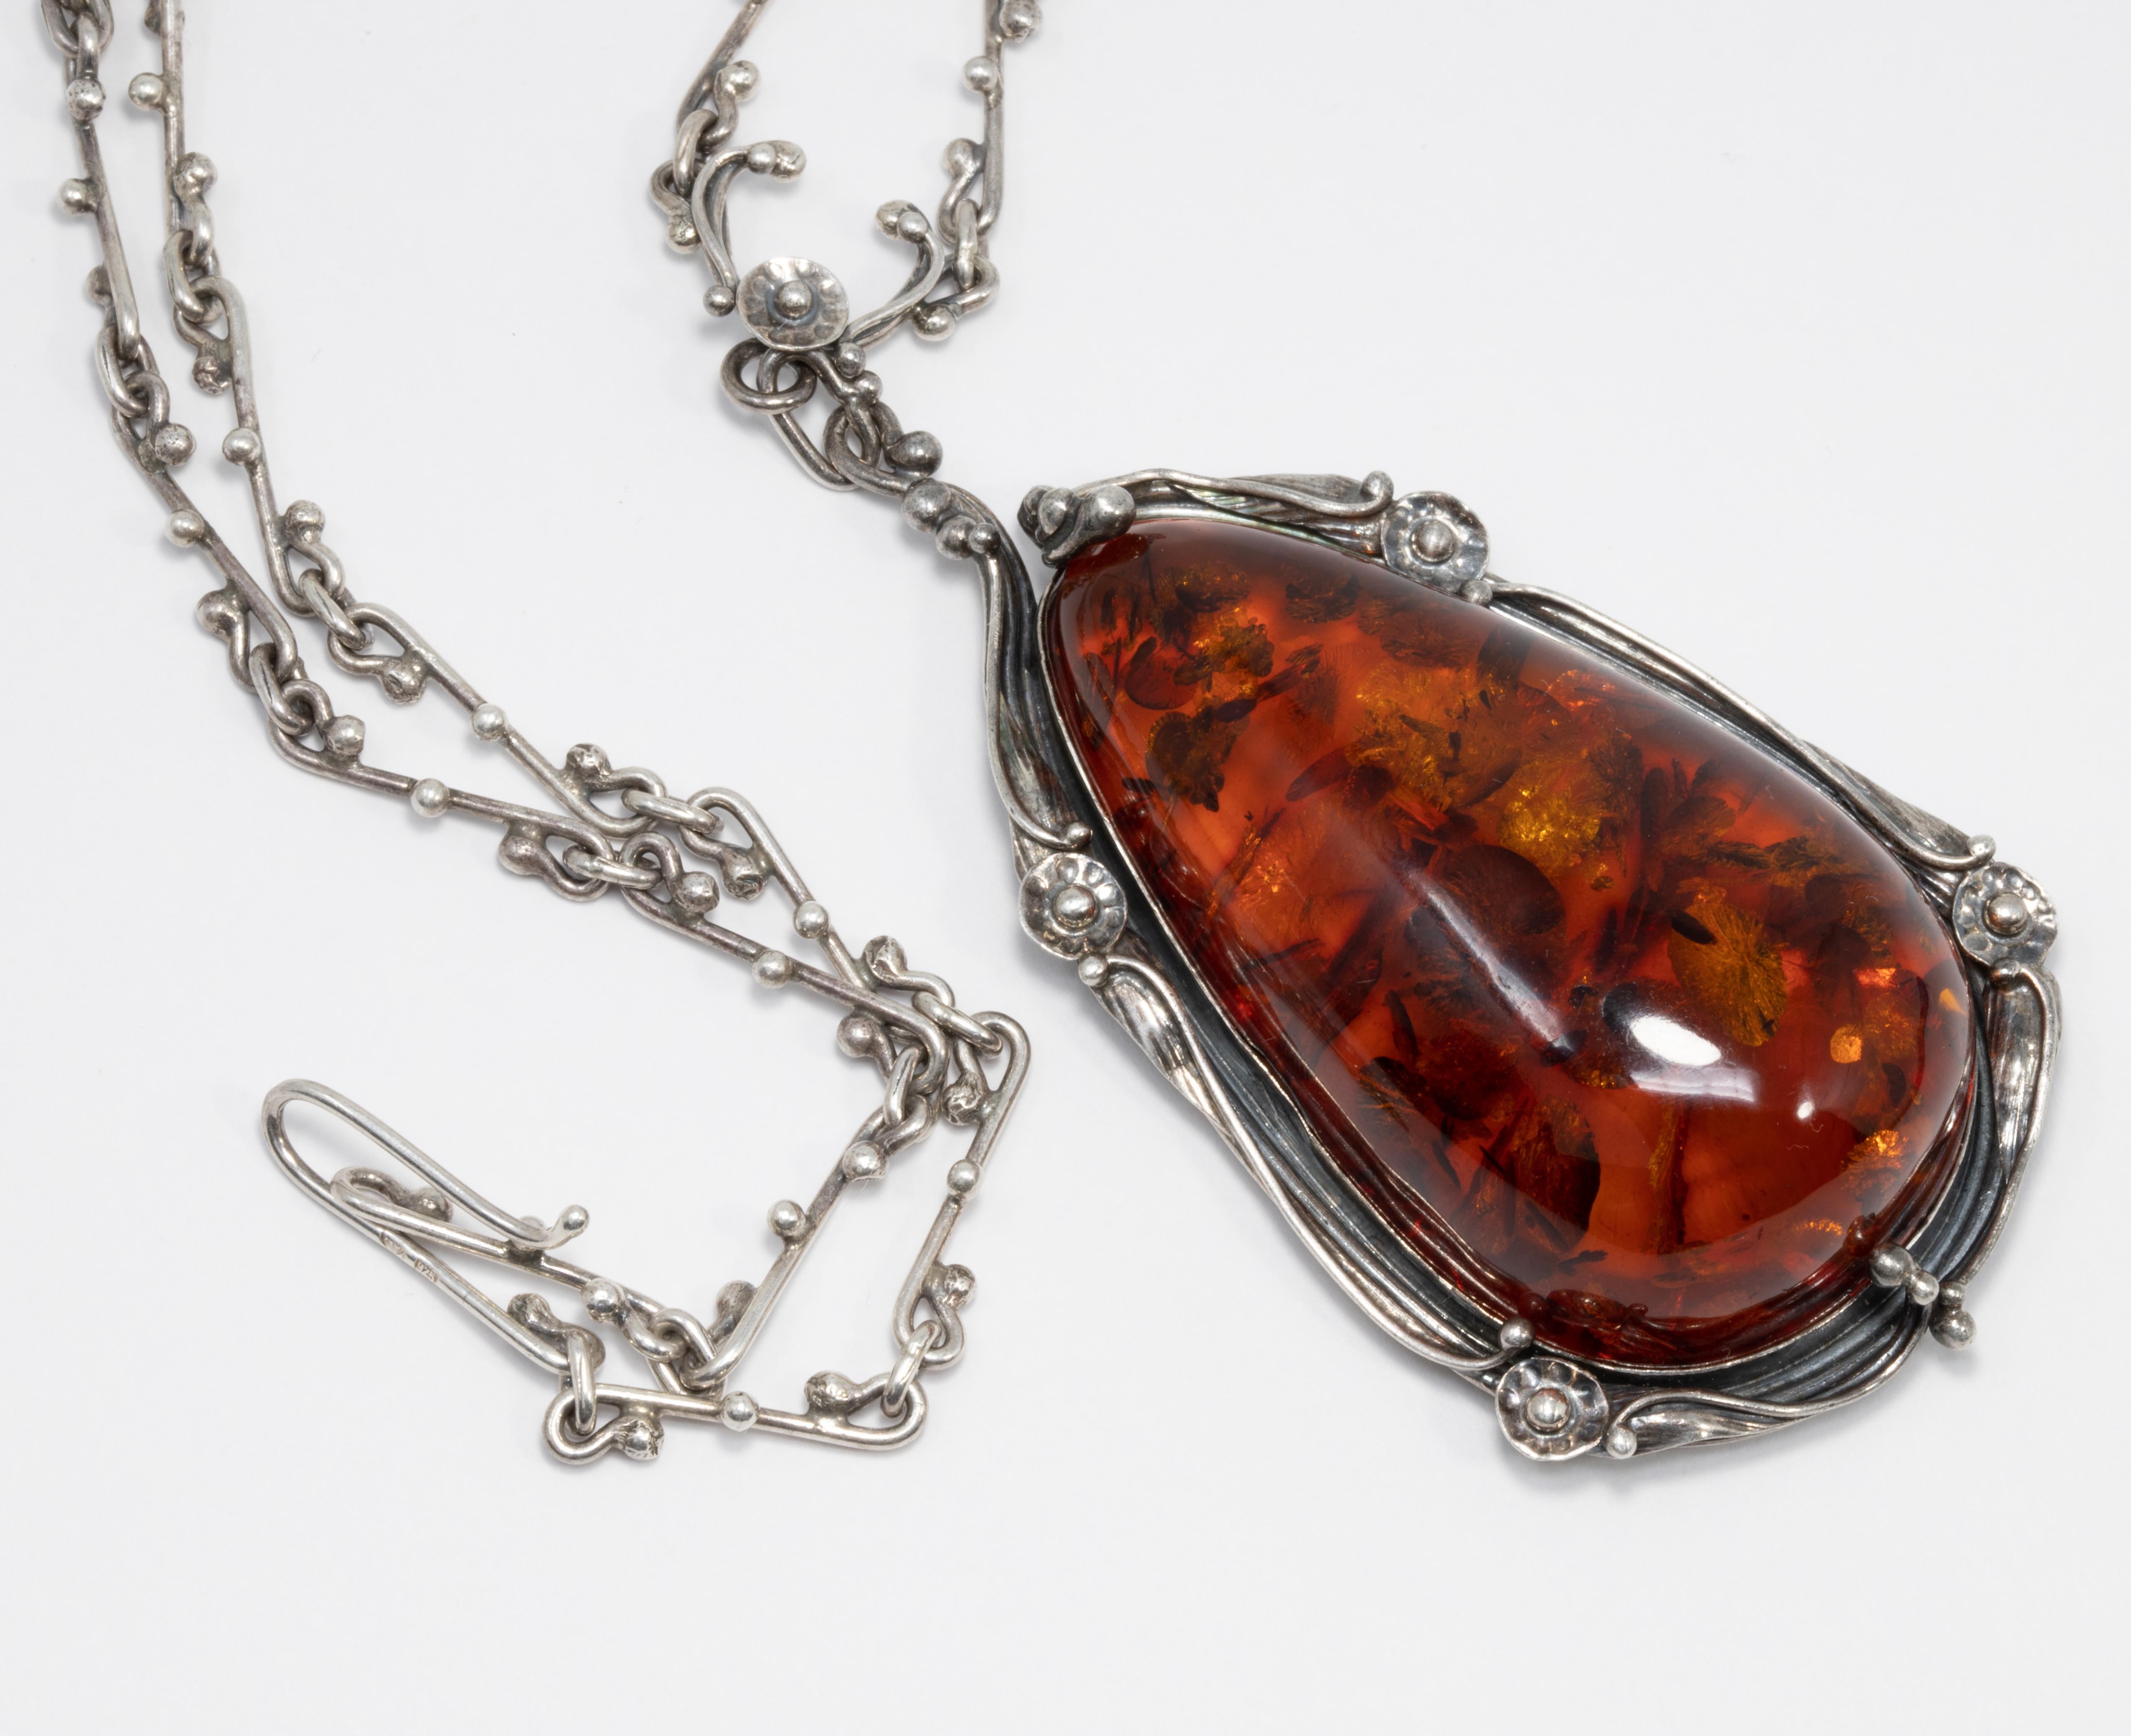 Exquisite Russian pendant, featuring a large, genuine, Baltic amber cabochon set in an ornate, open-back bezel on a stylish chain.

Sterling Silver.

Necklace length: 19.5 inches / 49.5 cm
Pendant dimensions: 2.7 x 1.6 in / 6.5 x 4.2 cm